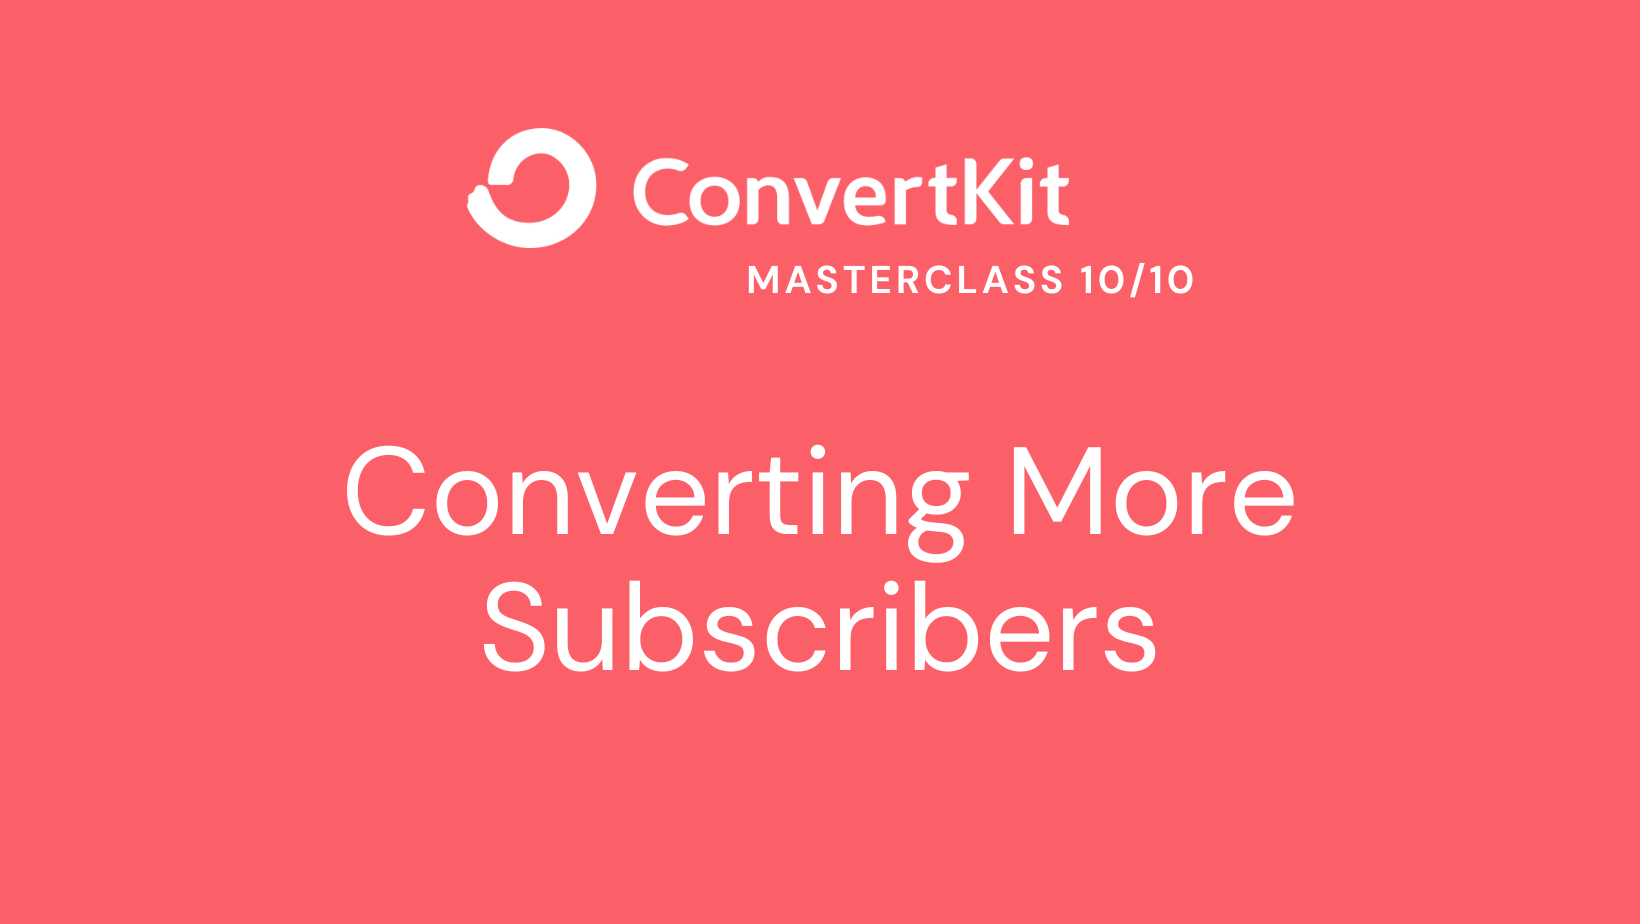 Converting More Subscribers with Convertkit: Best Practices